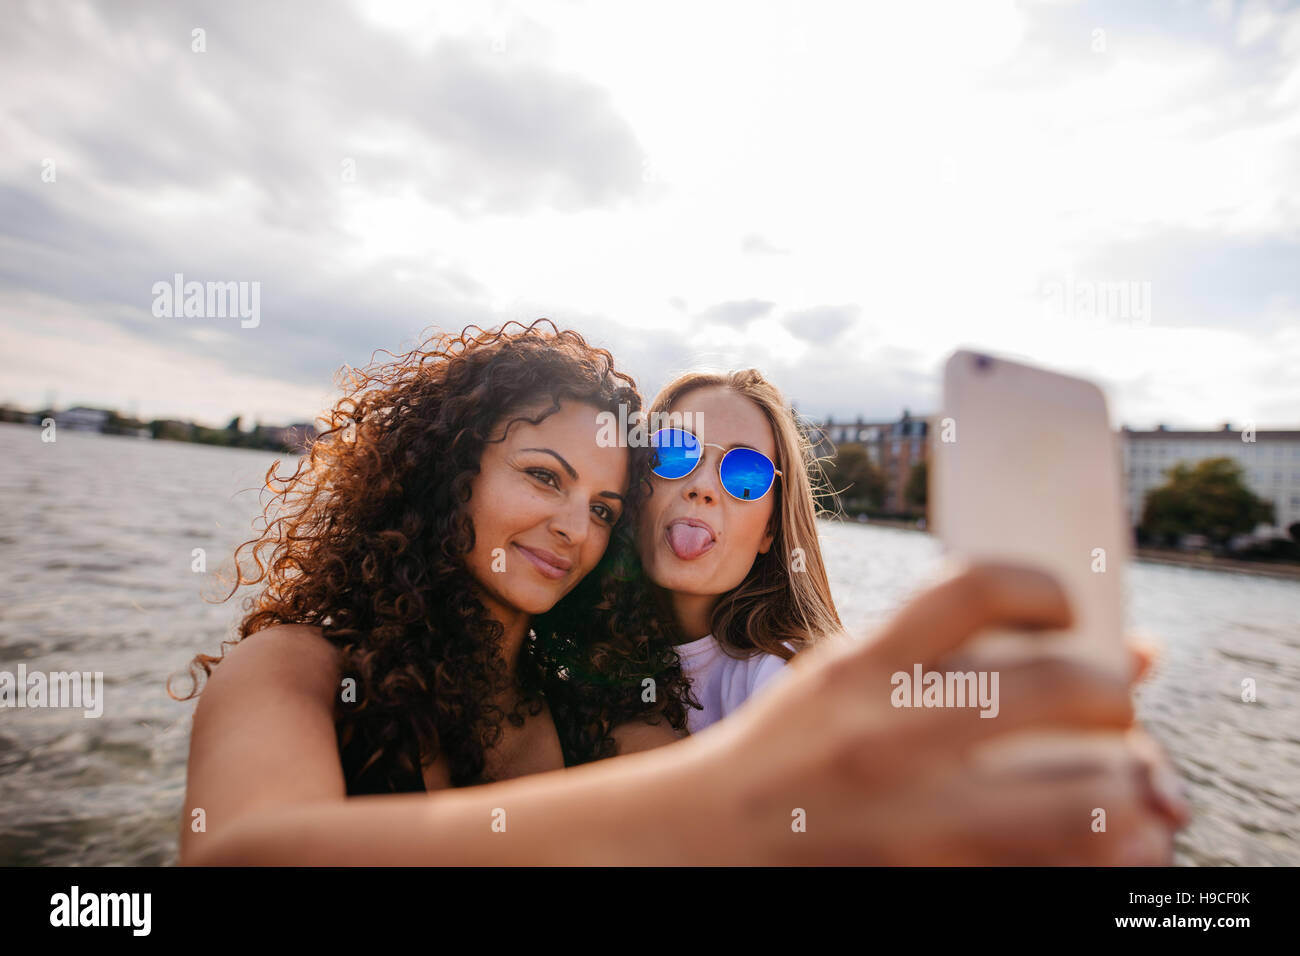 Shot of teenage girls taking selfie with smart phone by the lake. One sticking out tongue with other holding mobile phone. Stock Photo